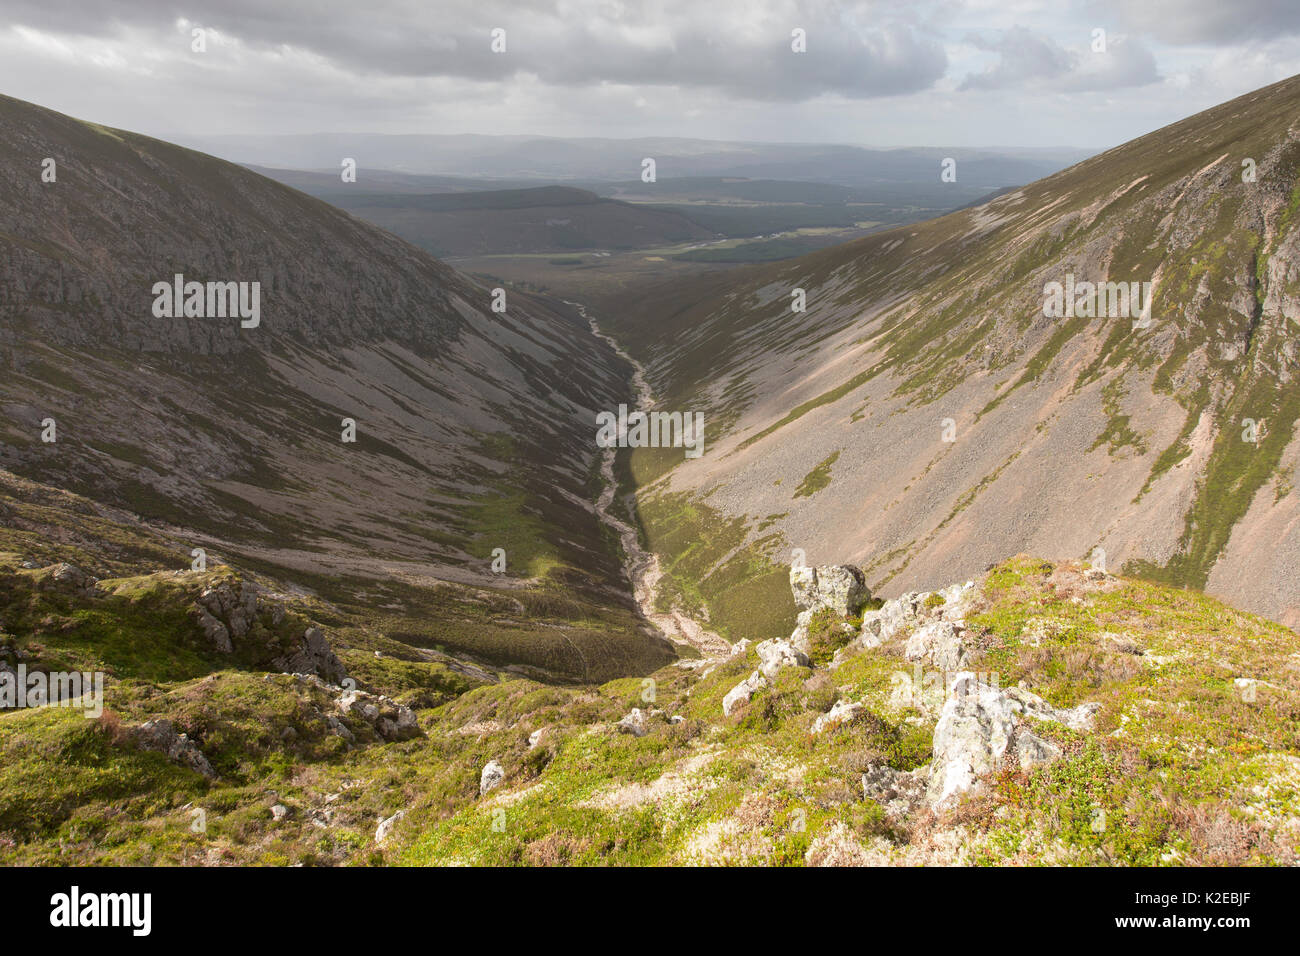 View into Coire Garbhlach, Glenfeshie, Cairngorms National Park, Scotland, UK, August 2013. Stock Photo